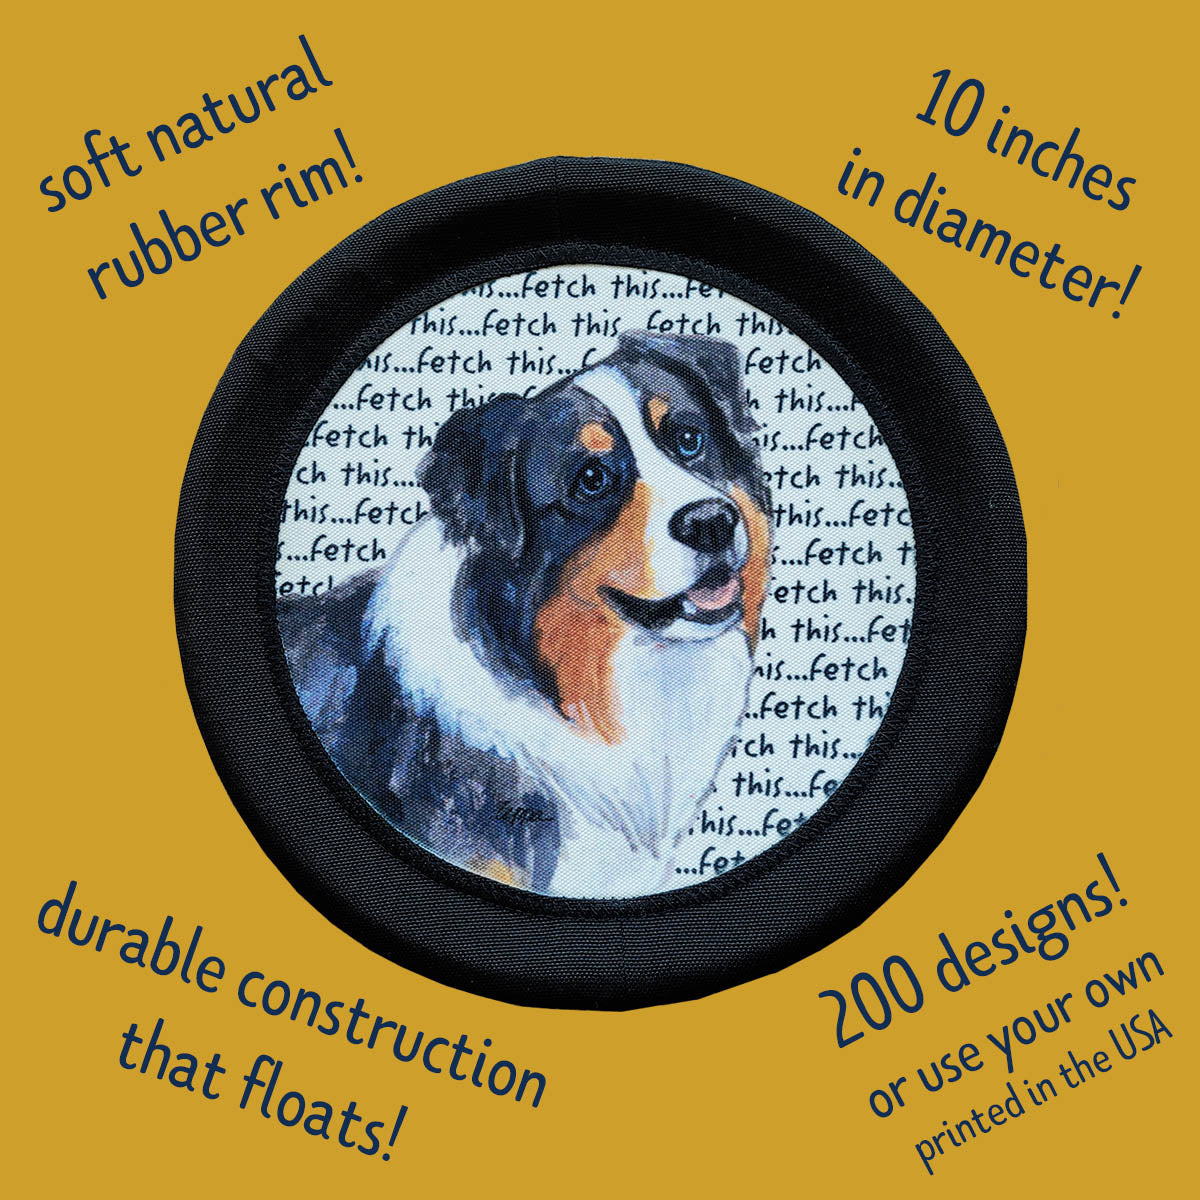 Features of the FotoFrisby Flying Disk Dog Toy - soft rubber rim, durable construction and it floats